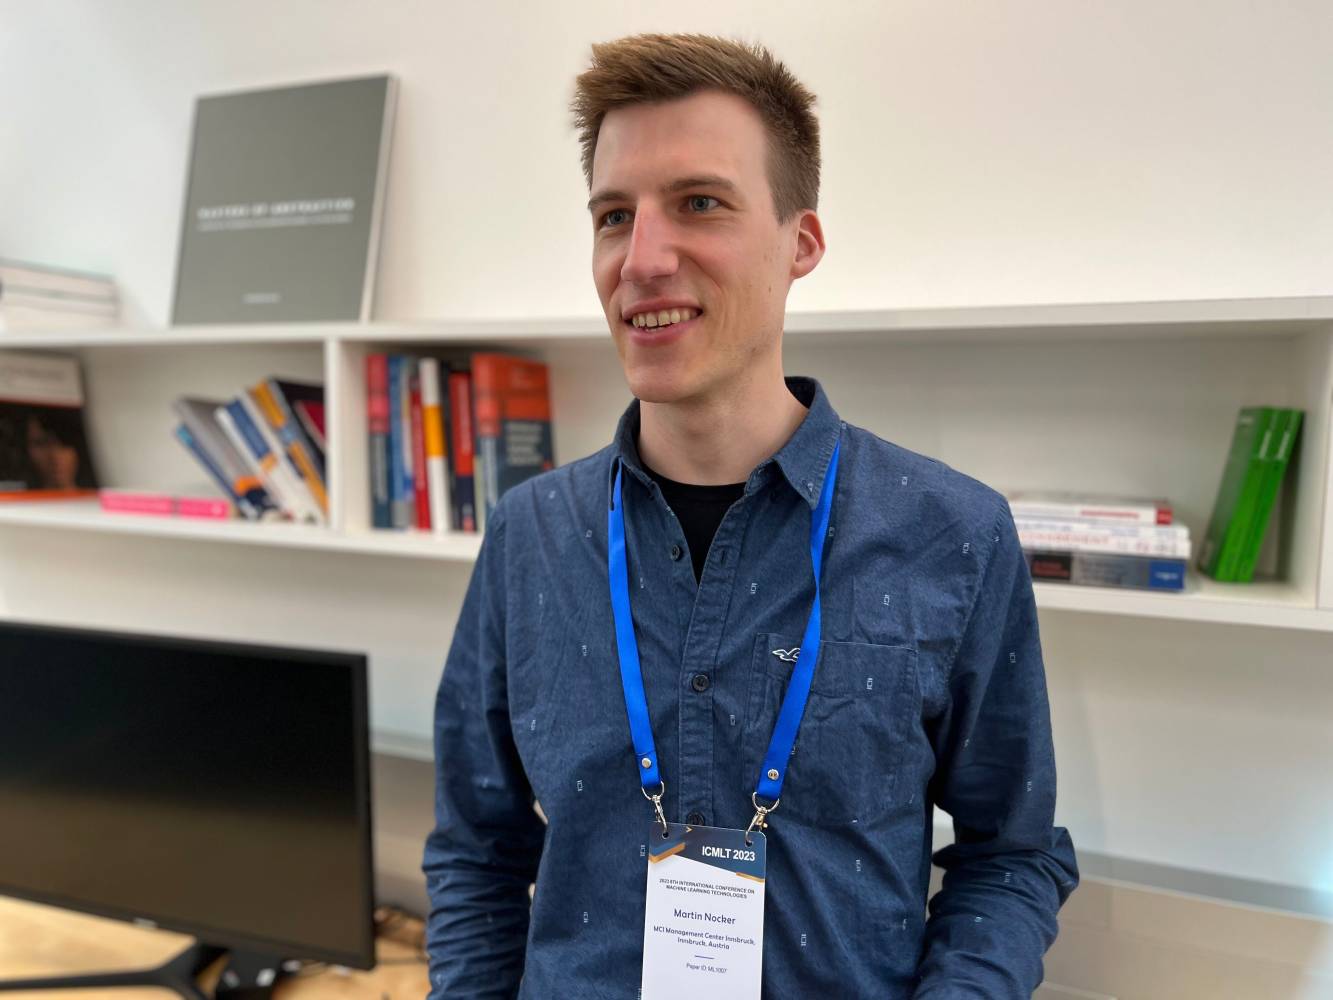 Martin Nocker, project researcher at the department of Digital Business & Software Engineering, was one of many speakers at the 8th edition of the ICMLT in Stockholm this March.